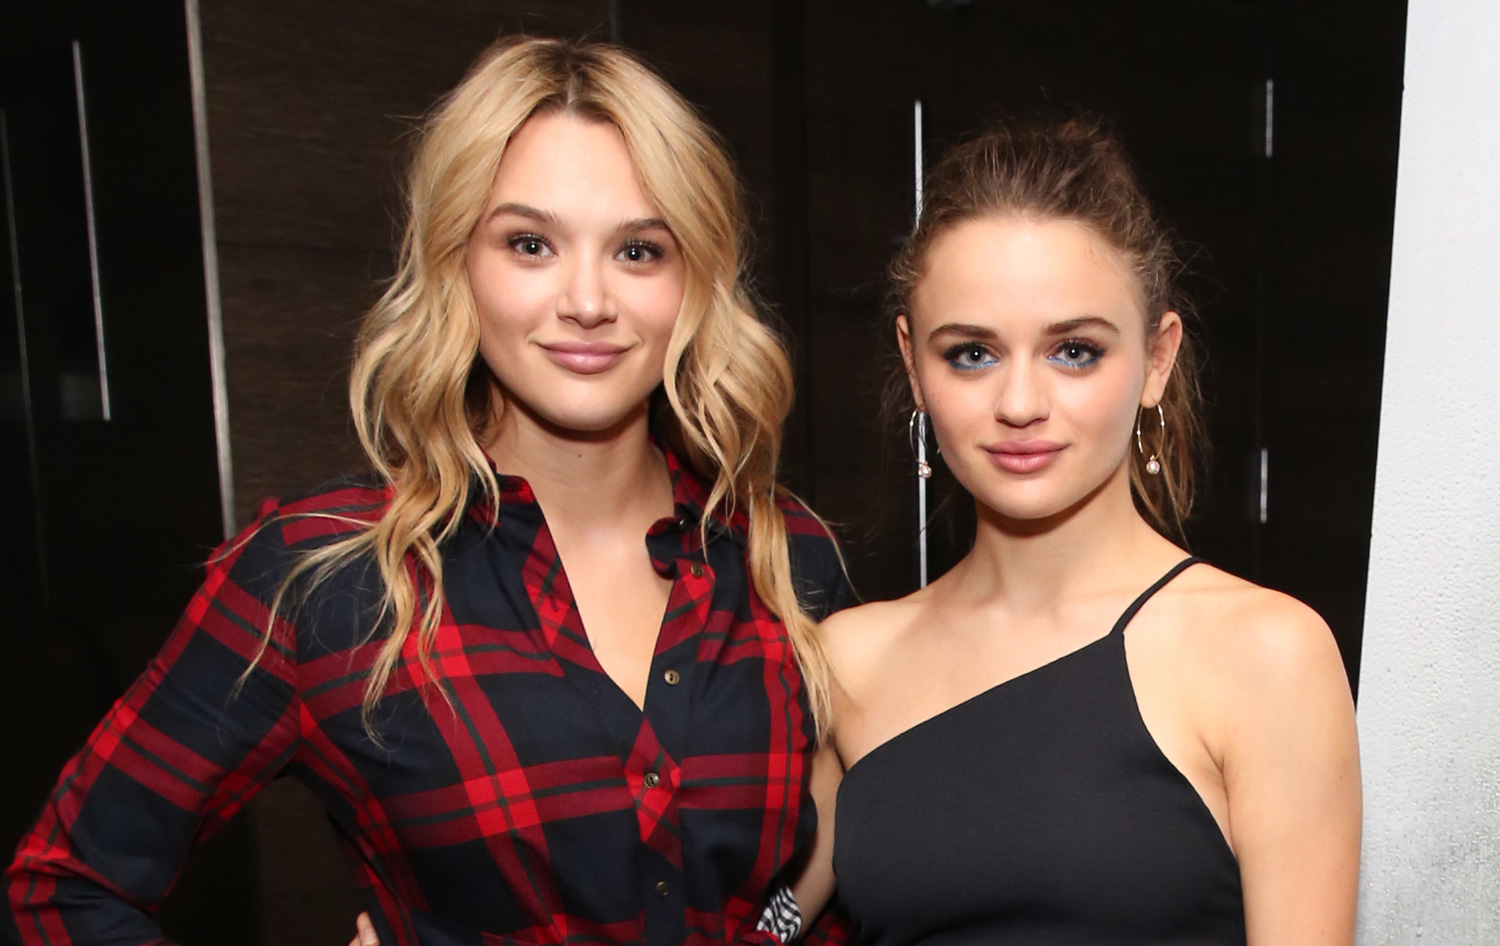 Are hunter king and joey king related